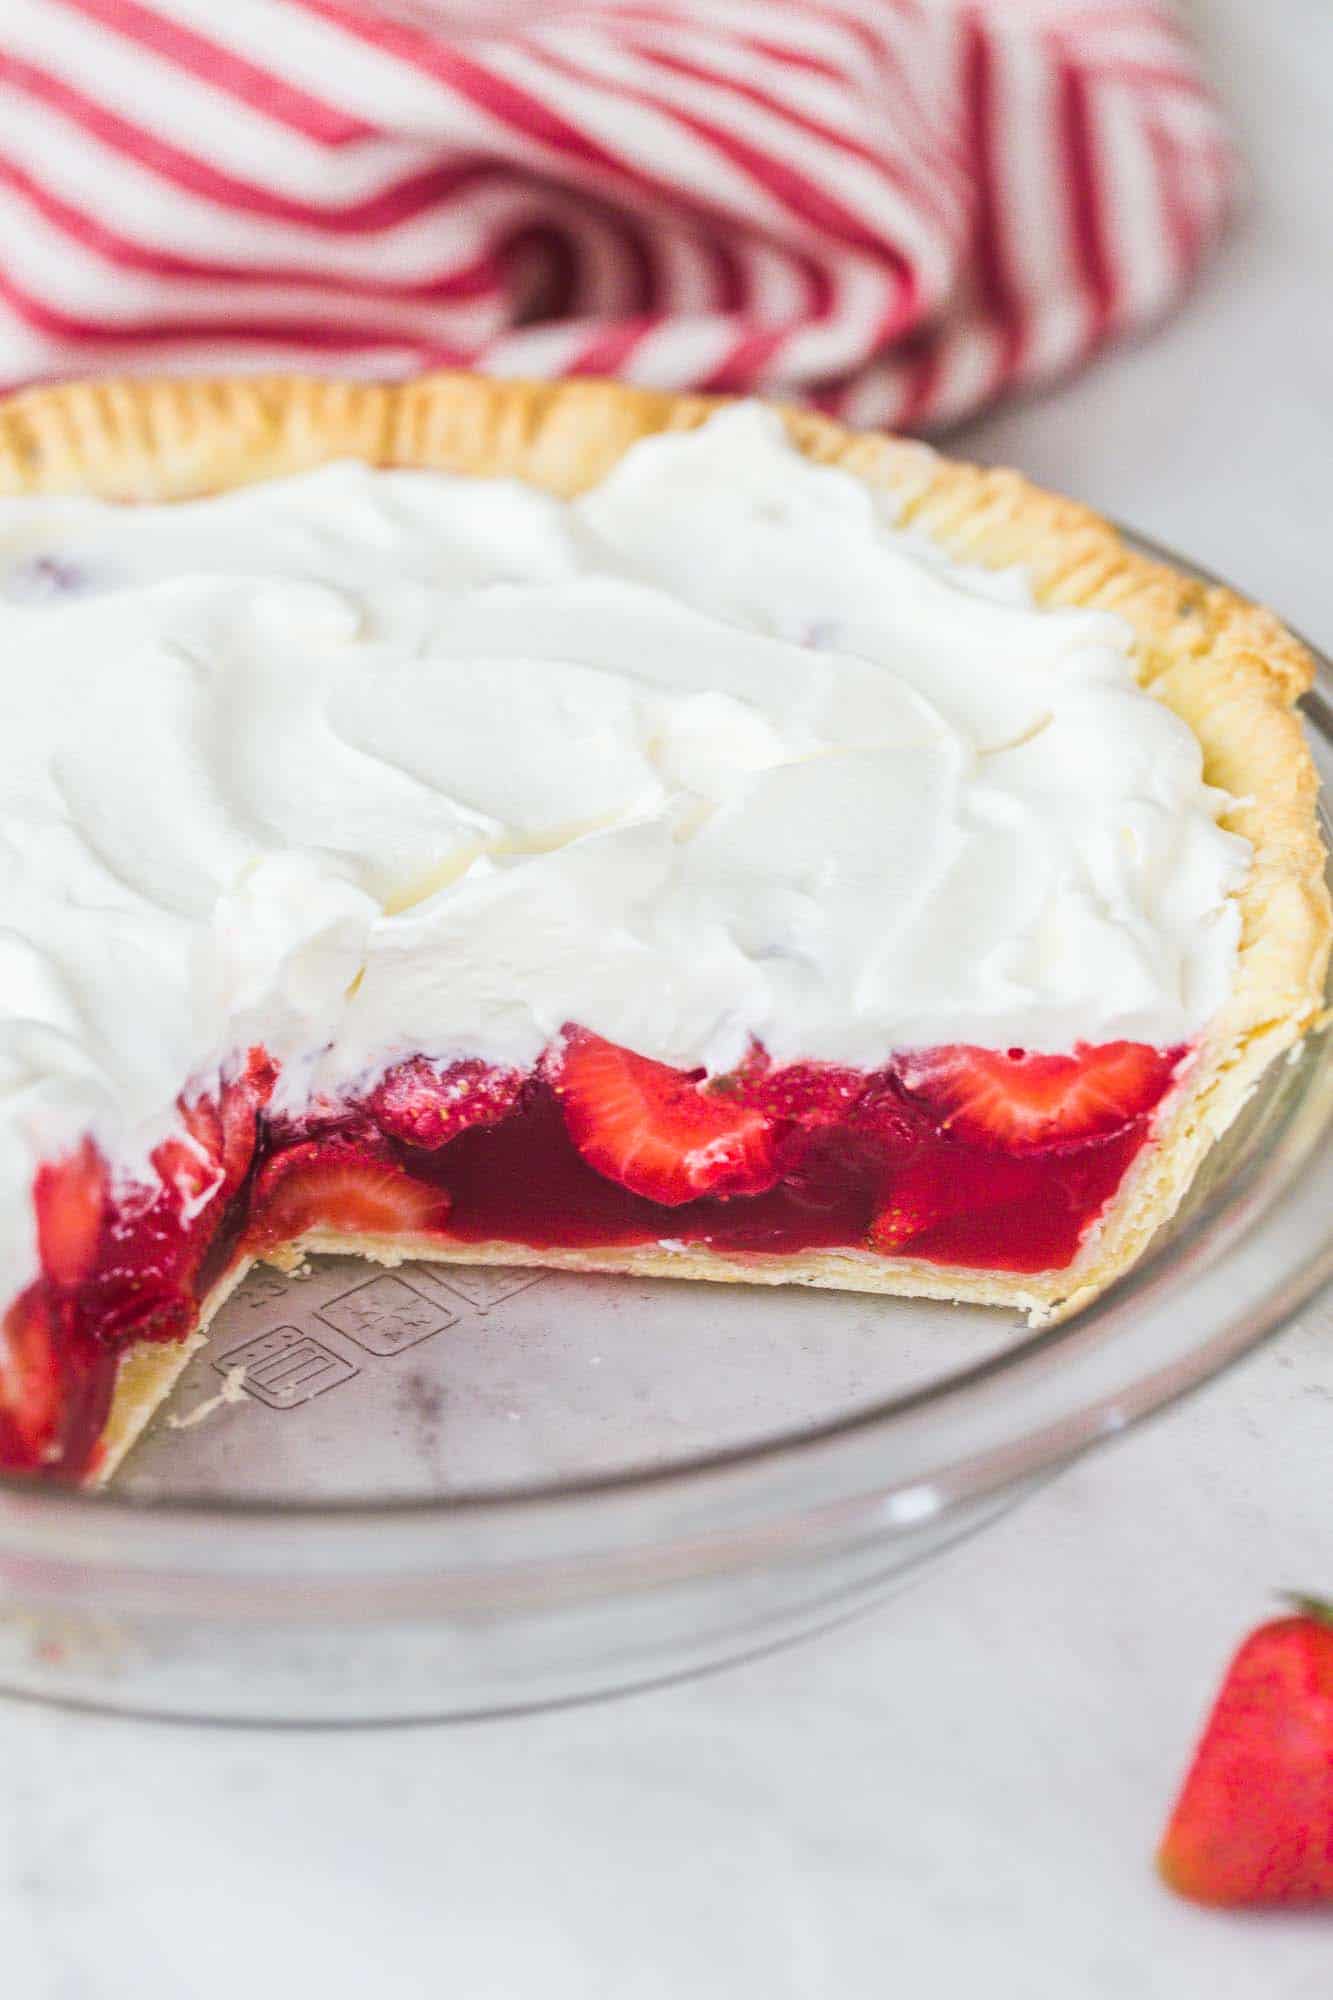 Whole strawberry pie in a pie dish, topped with whipped cream